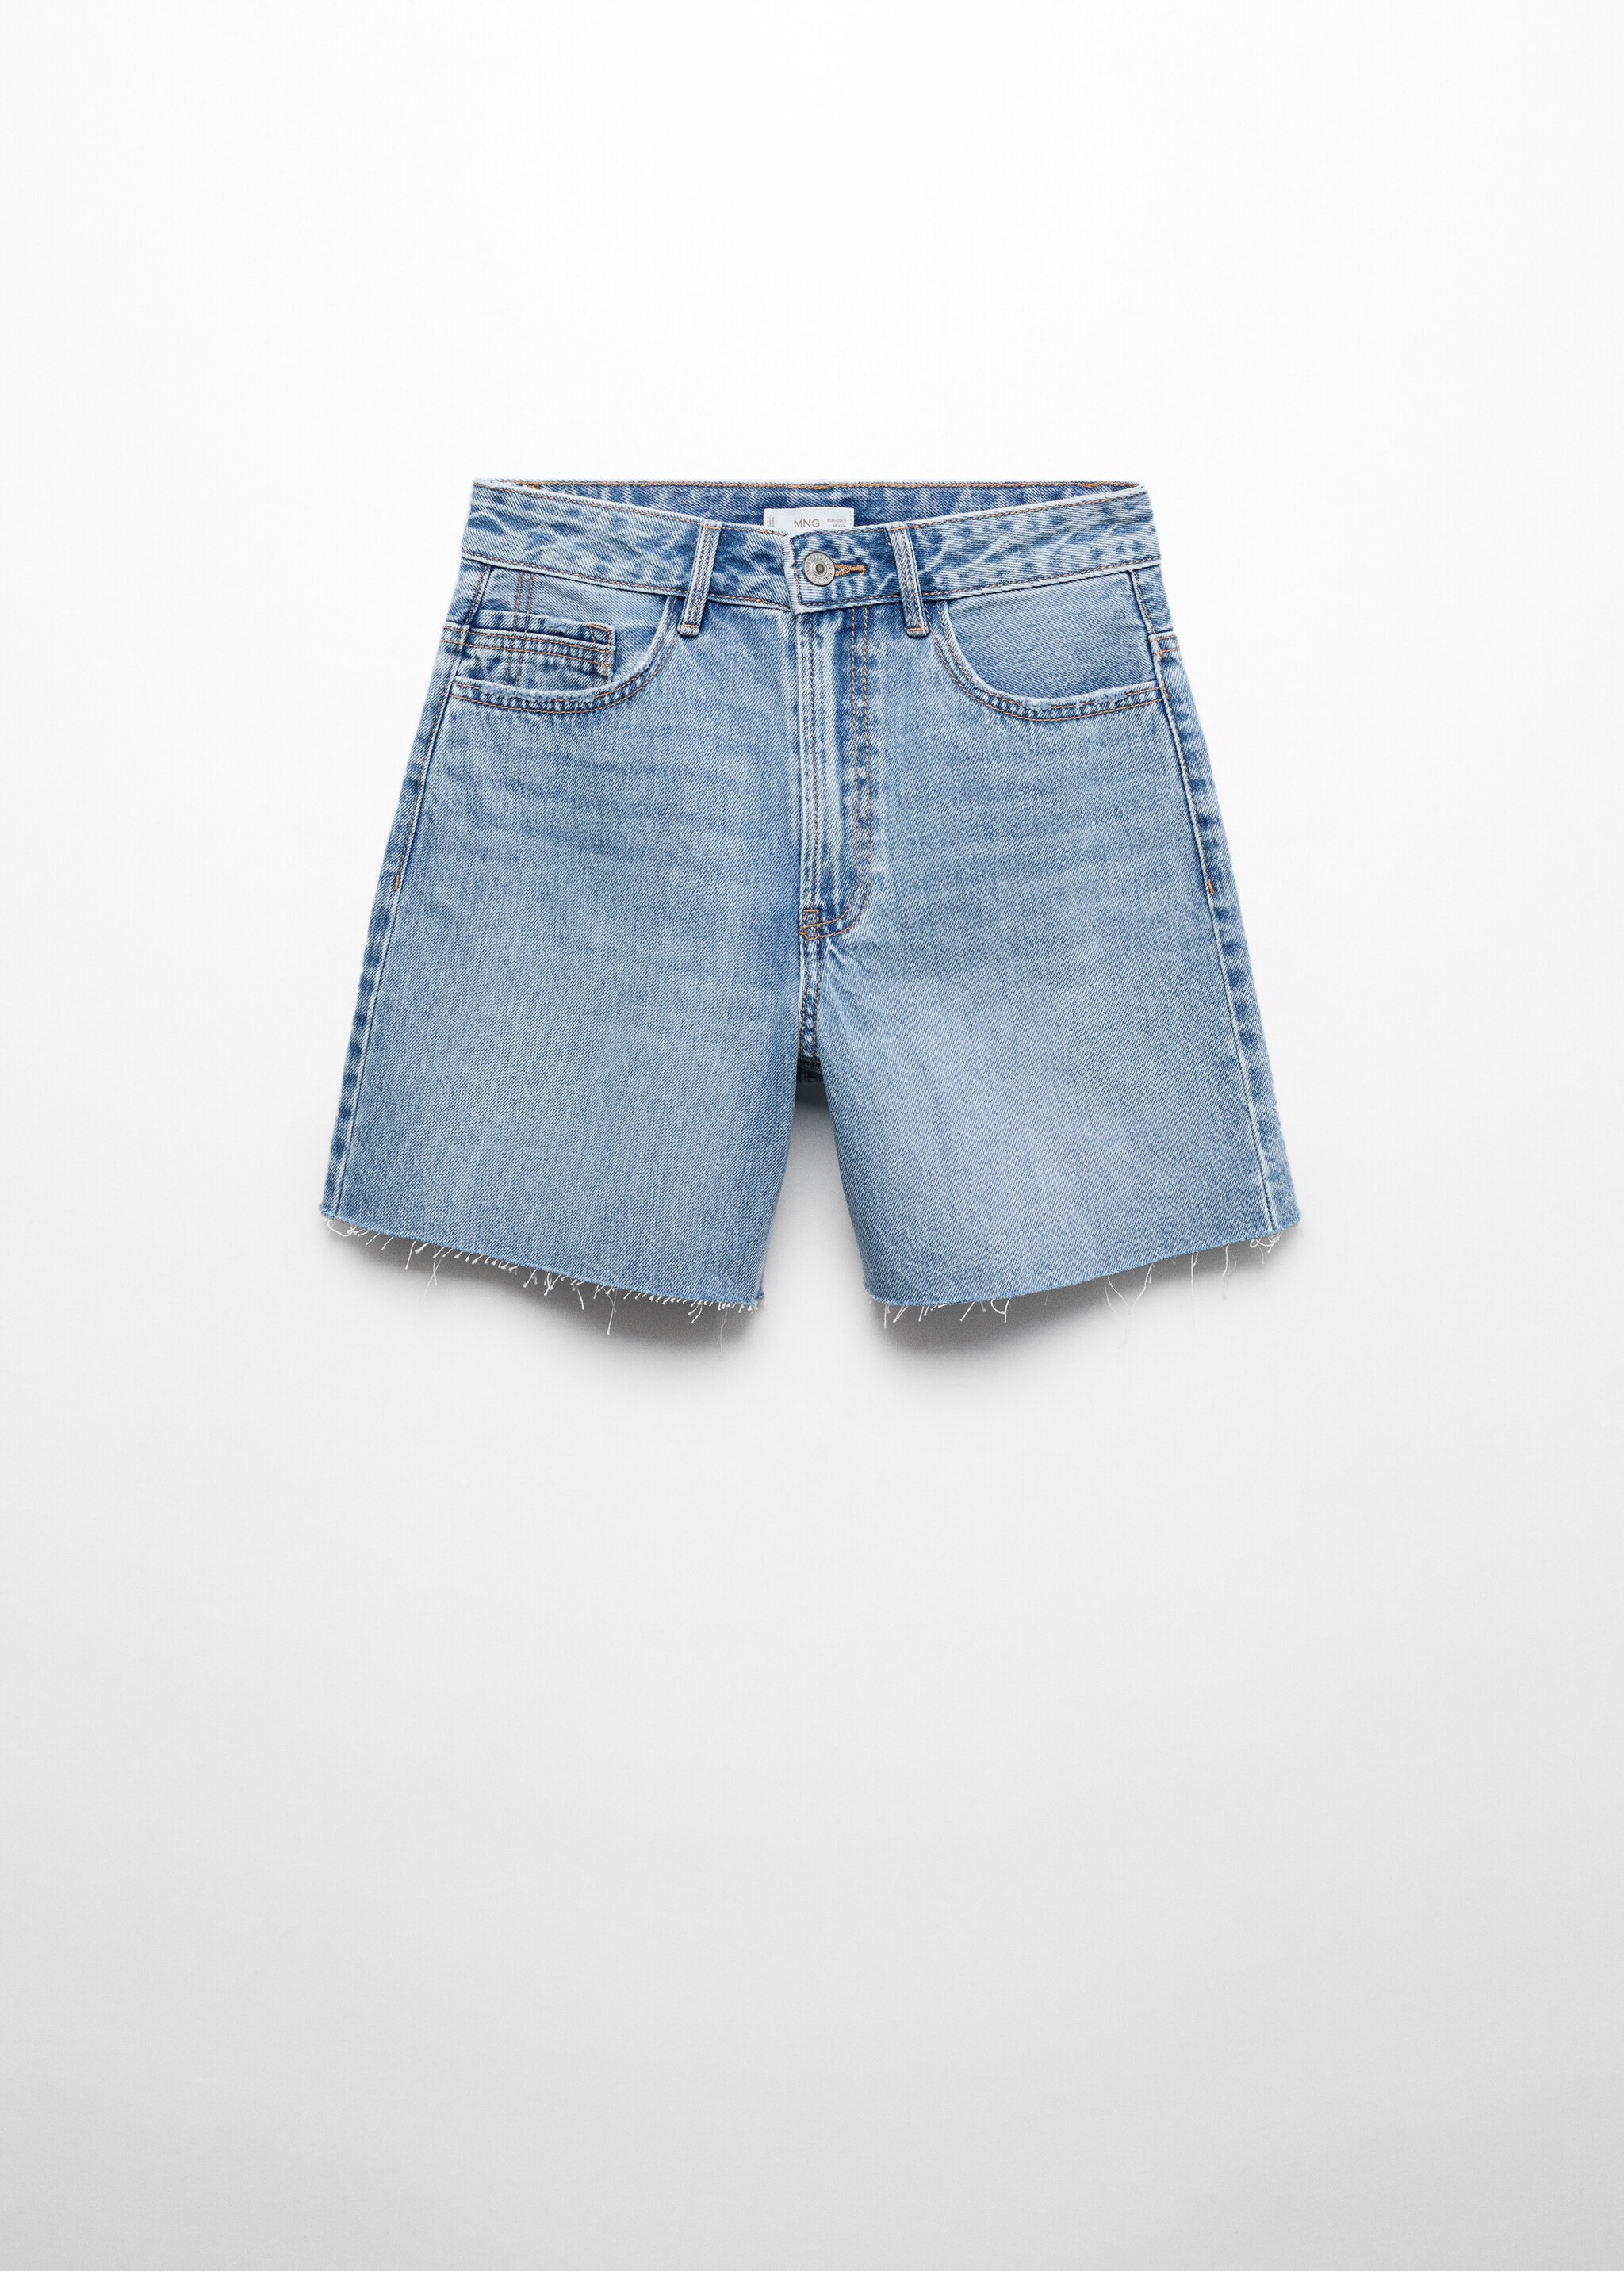 Mid-rise denim shorts - Article without model